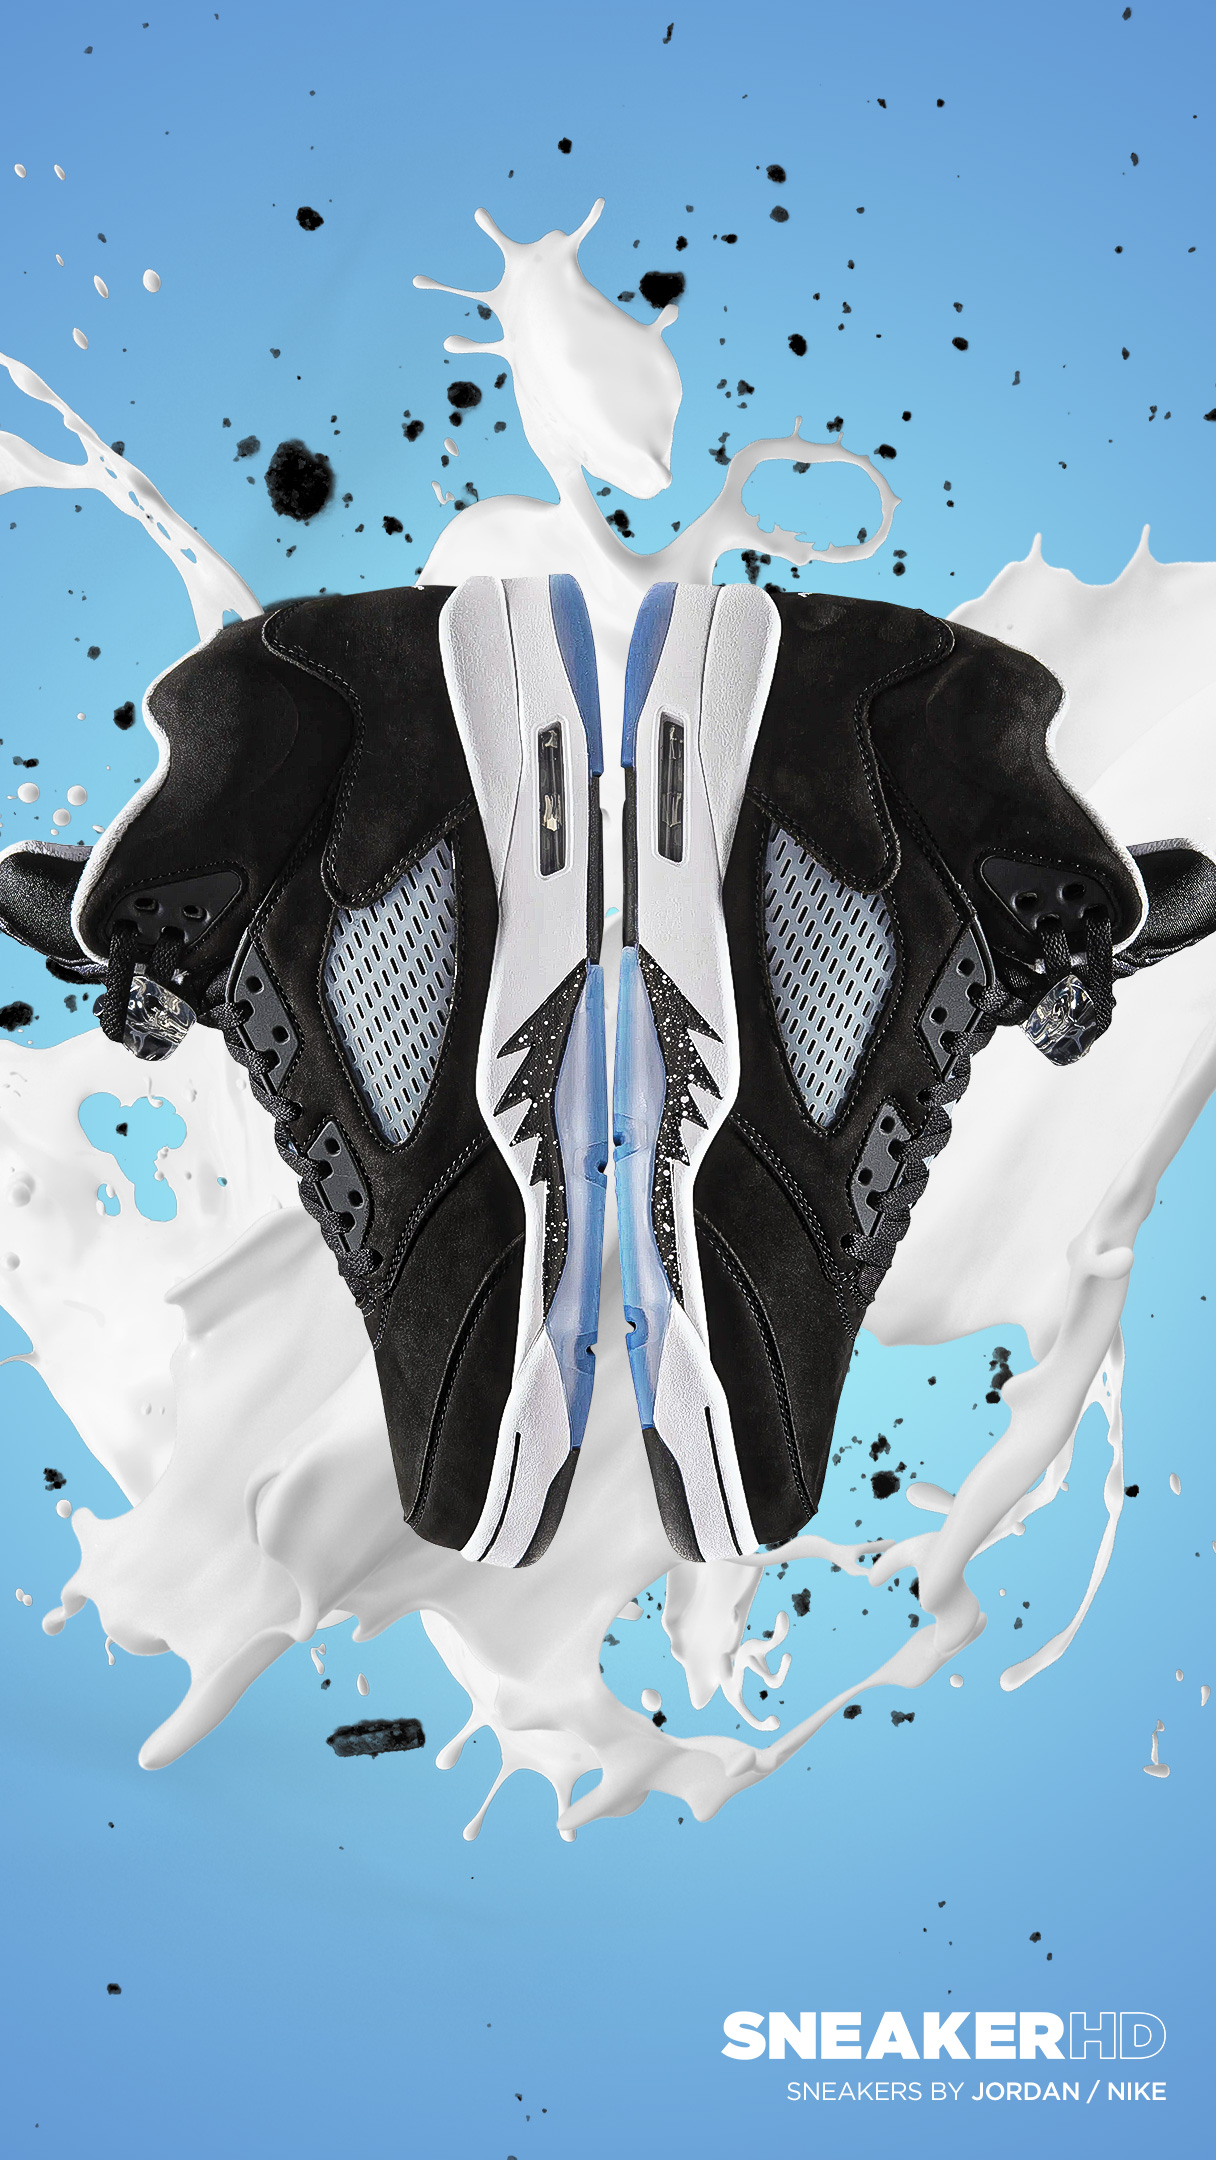  – Your favorite sneakers in 4K, Retina, Mobile and  HD wallpaper resolutions! » Blog Archive NEW Air Jordan 5 Oreo wallpaper &  poster!  - Your favorite sneakers in 4K,